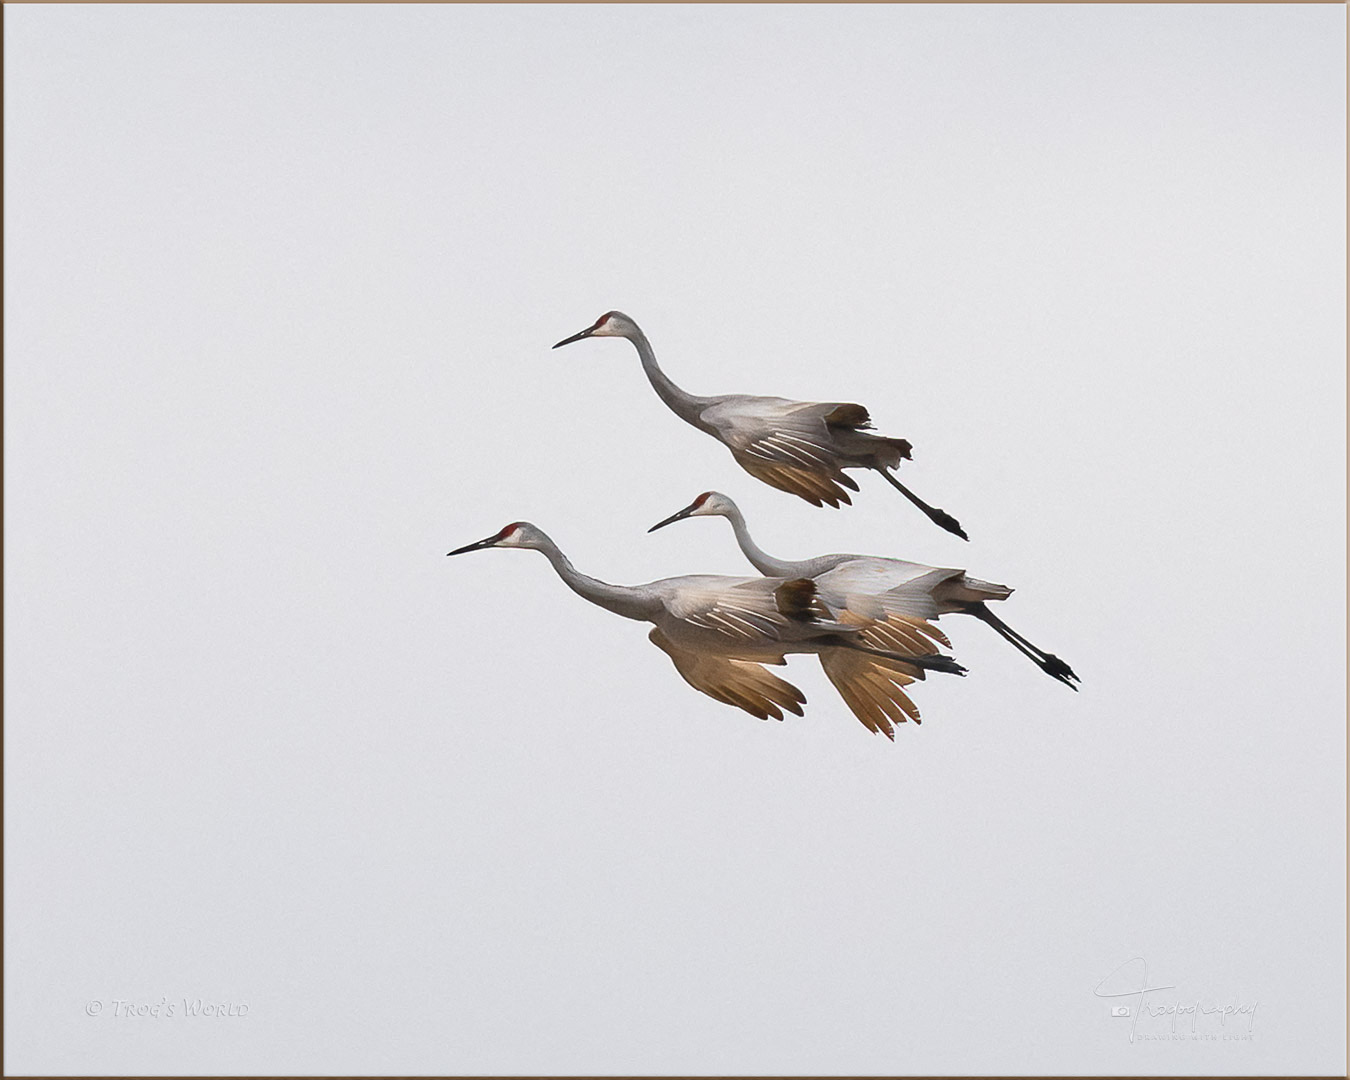 Sandhill Cranes coming in for a landing